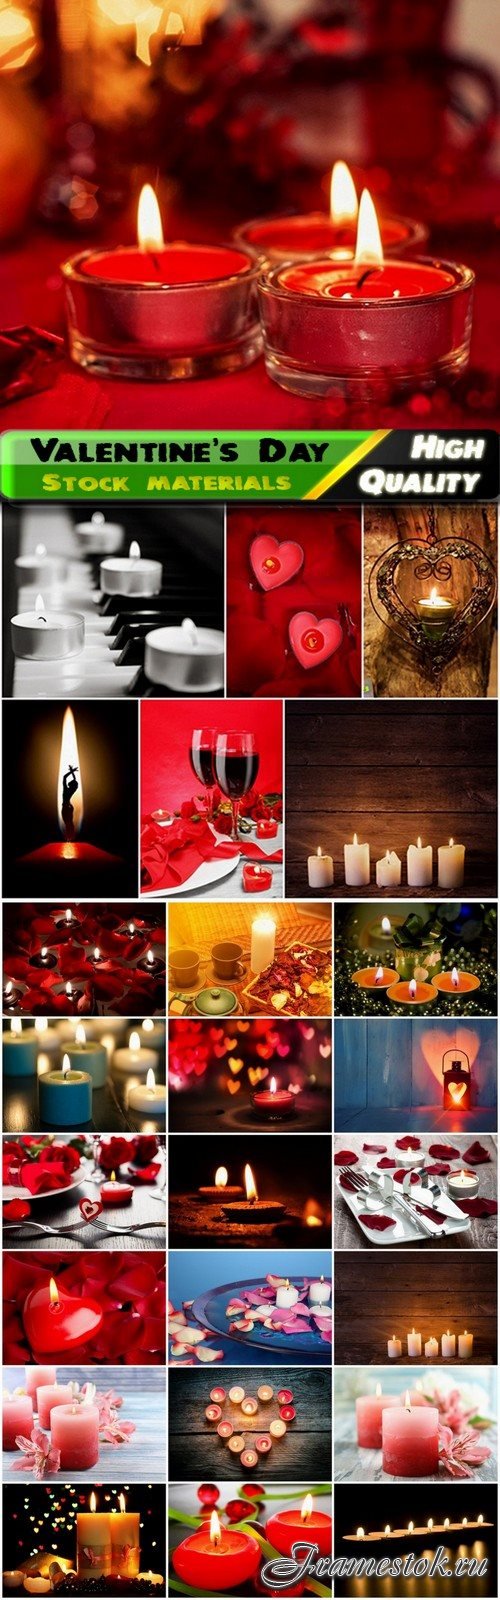 Romantic cards for Valentines Day with hearts and candles - 25 HQ Jpg